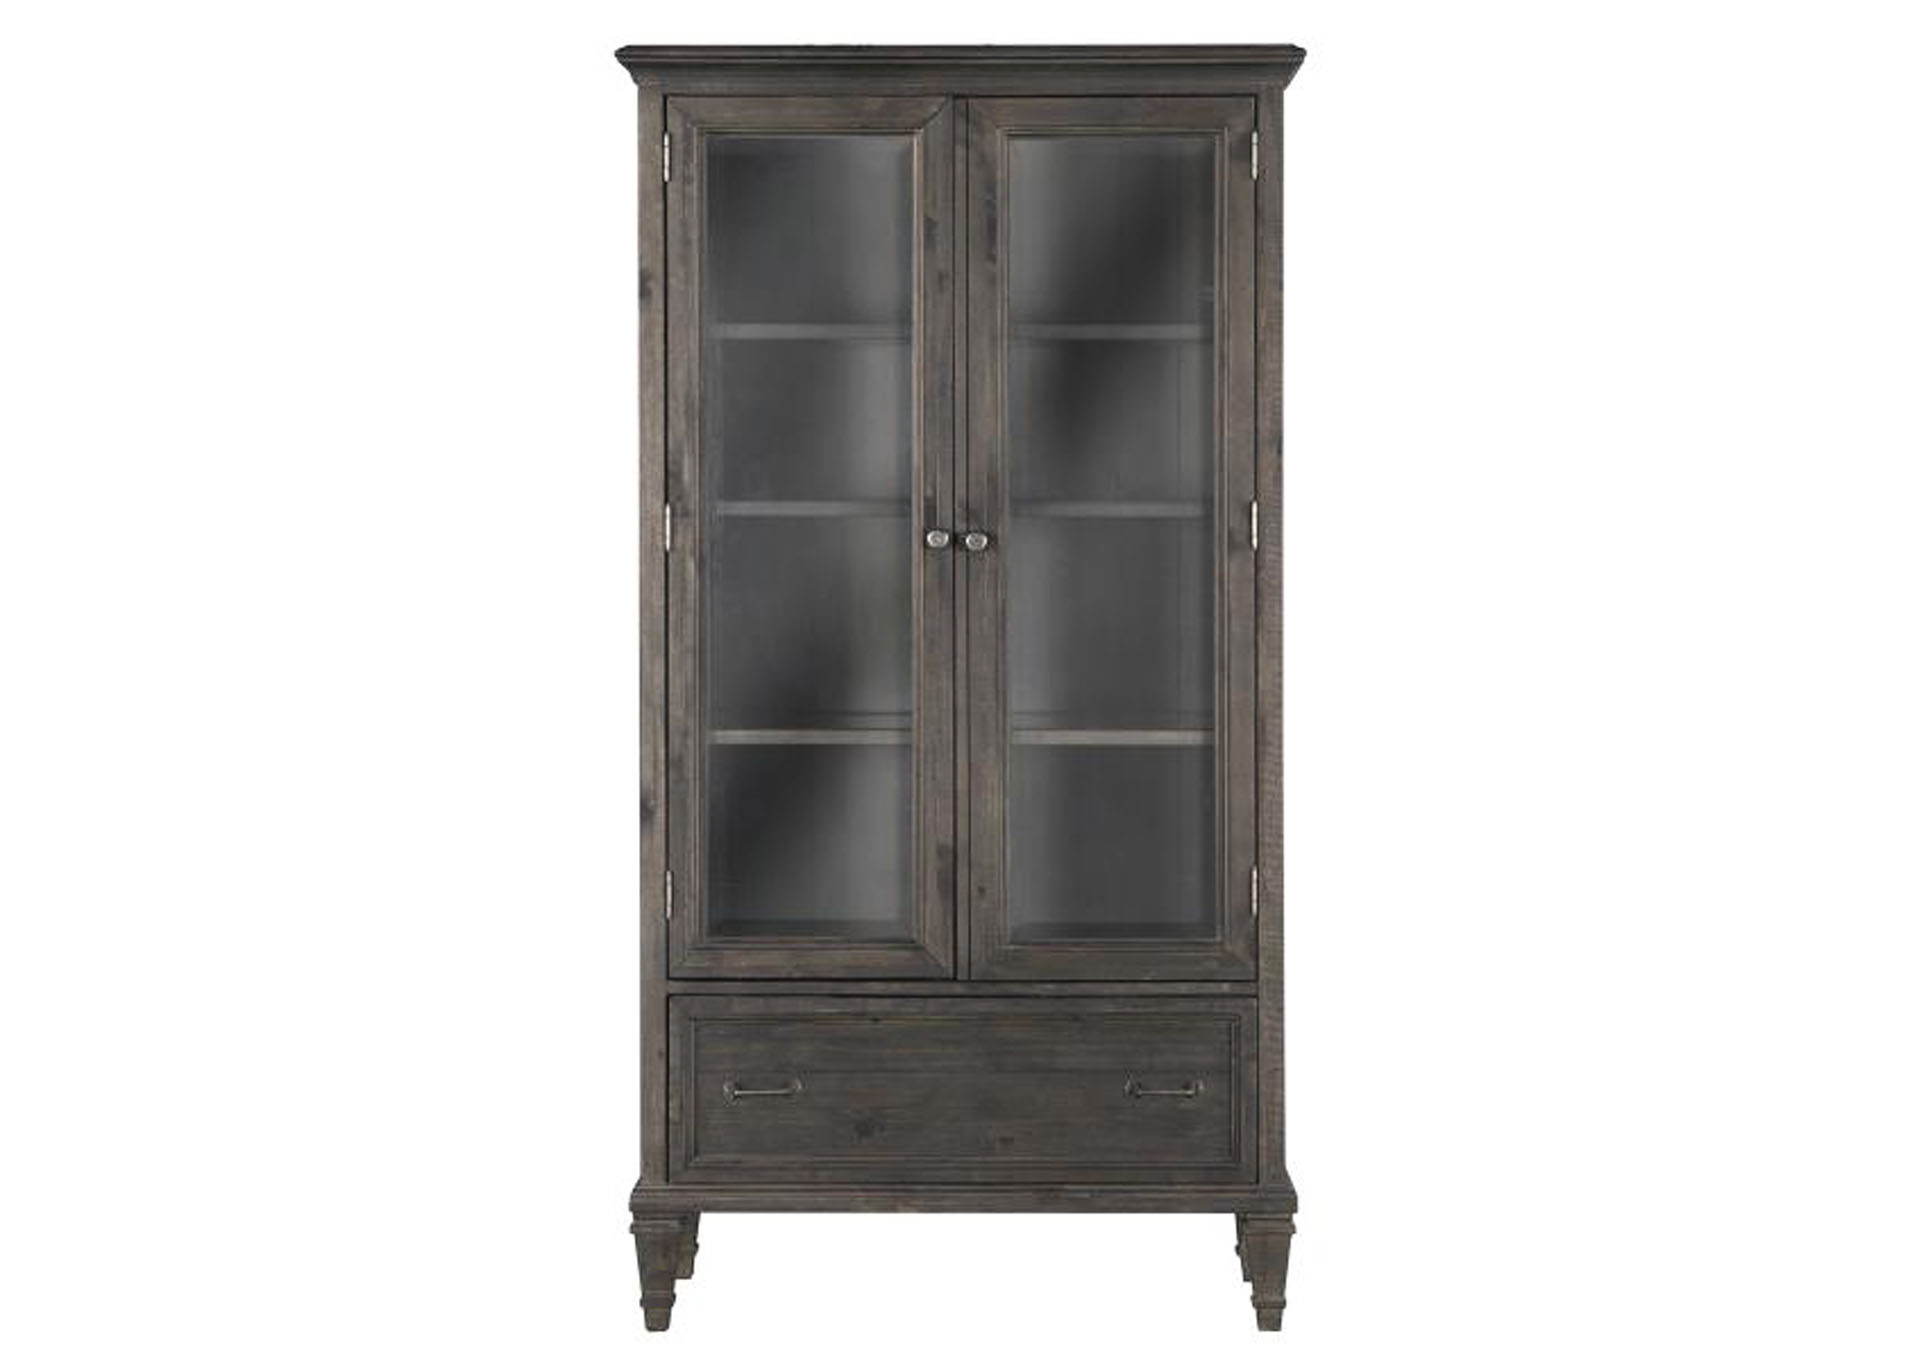 Sutton Place Weathered Charcoal Door Bookcase,Magnussen